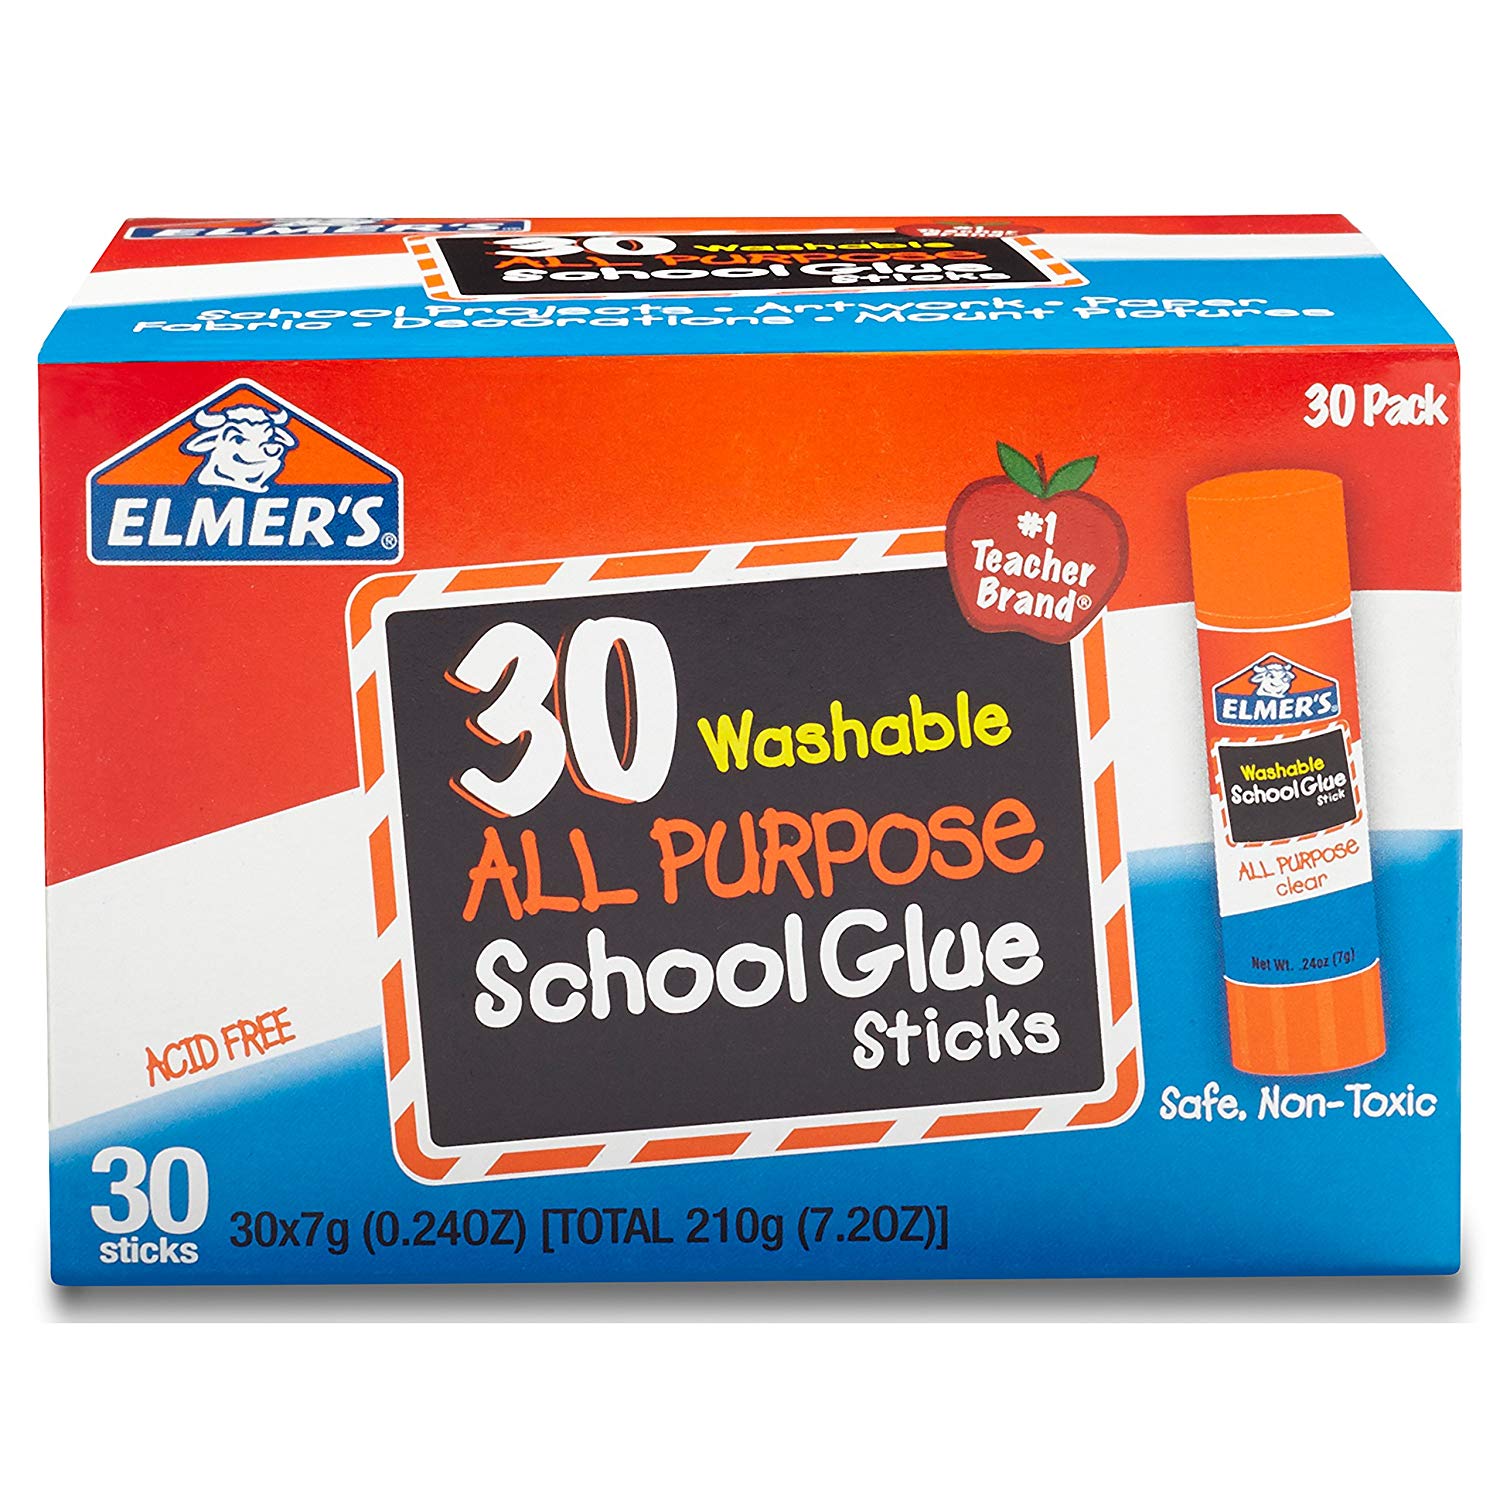 Elmer’s All Purpose School Glue Sticks, Washable, 30 Pack – Just $9.86! $.32 each!Back to school!